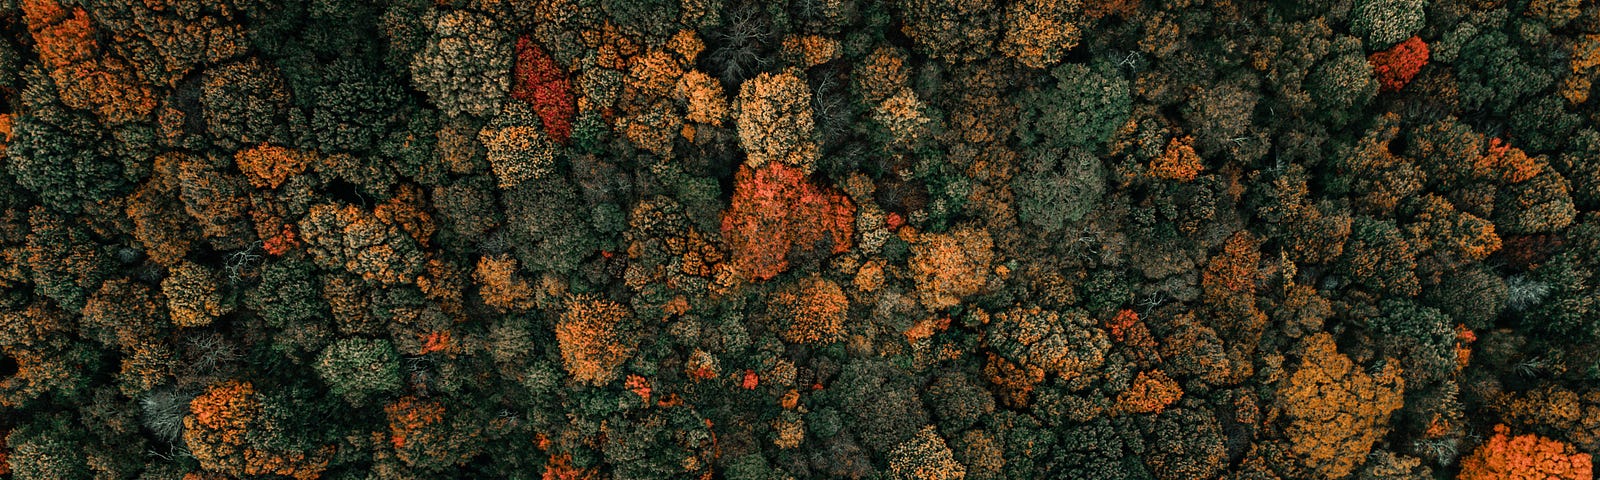 A birds-eye view photograph of a densely wooded area in the autumn — the trees are many different shades of green, red, orange and yellow.